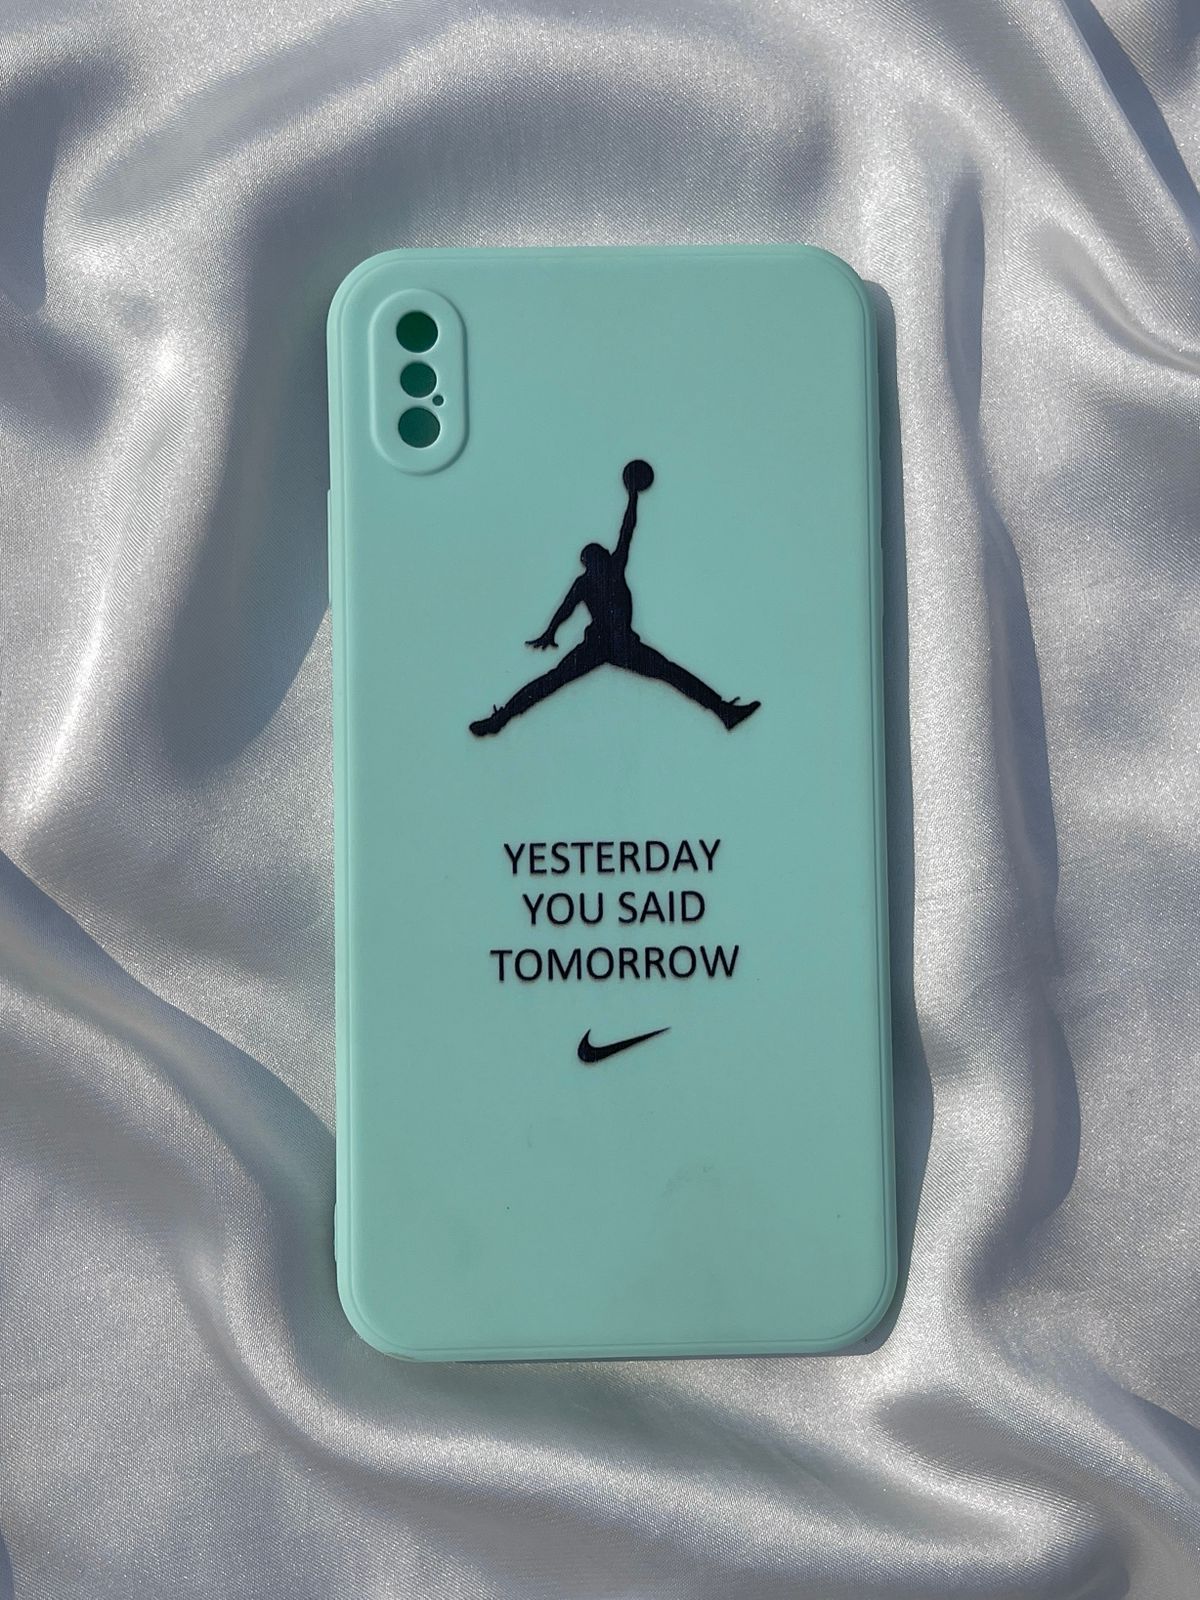 iPhone "XS Max" Silicone Case "Yesterday You Said Tomorrow" Edition